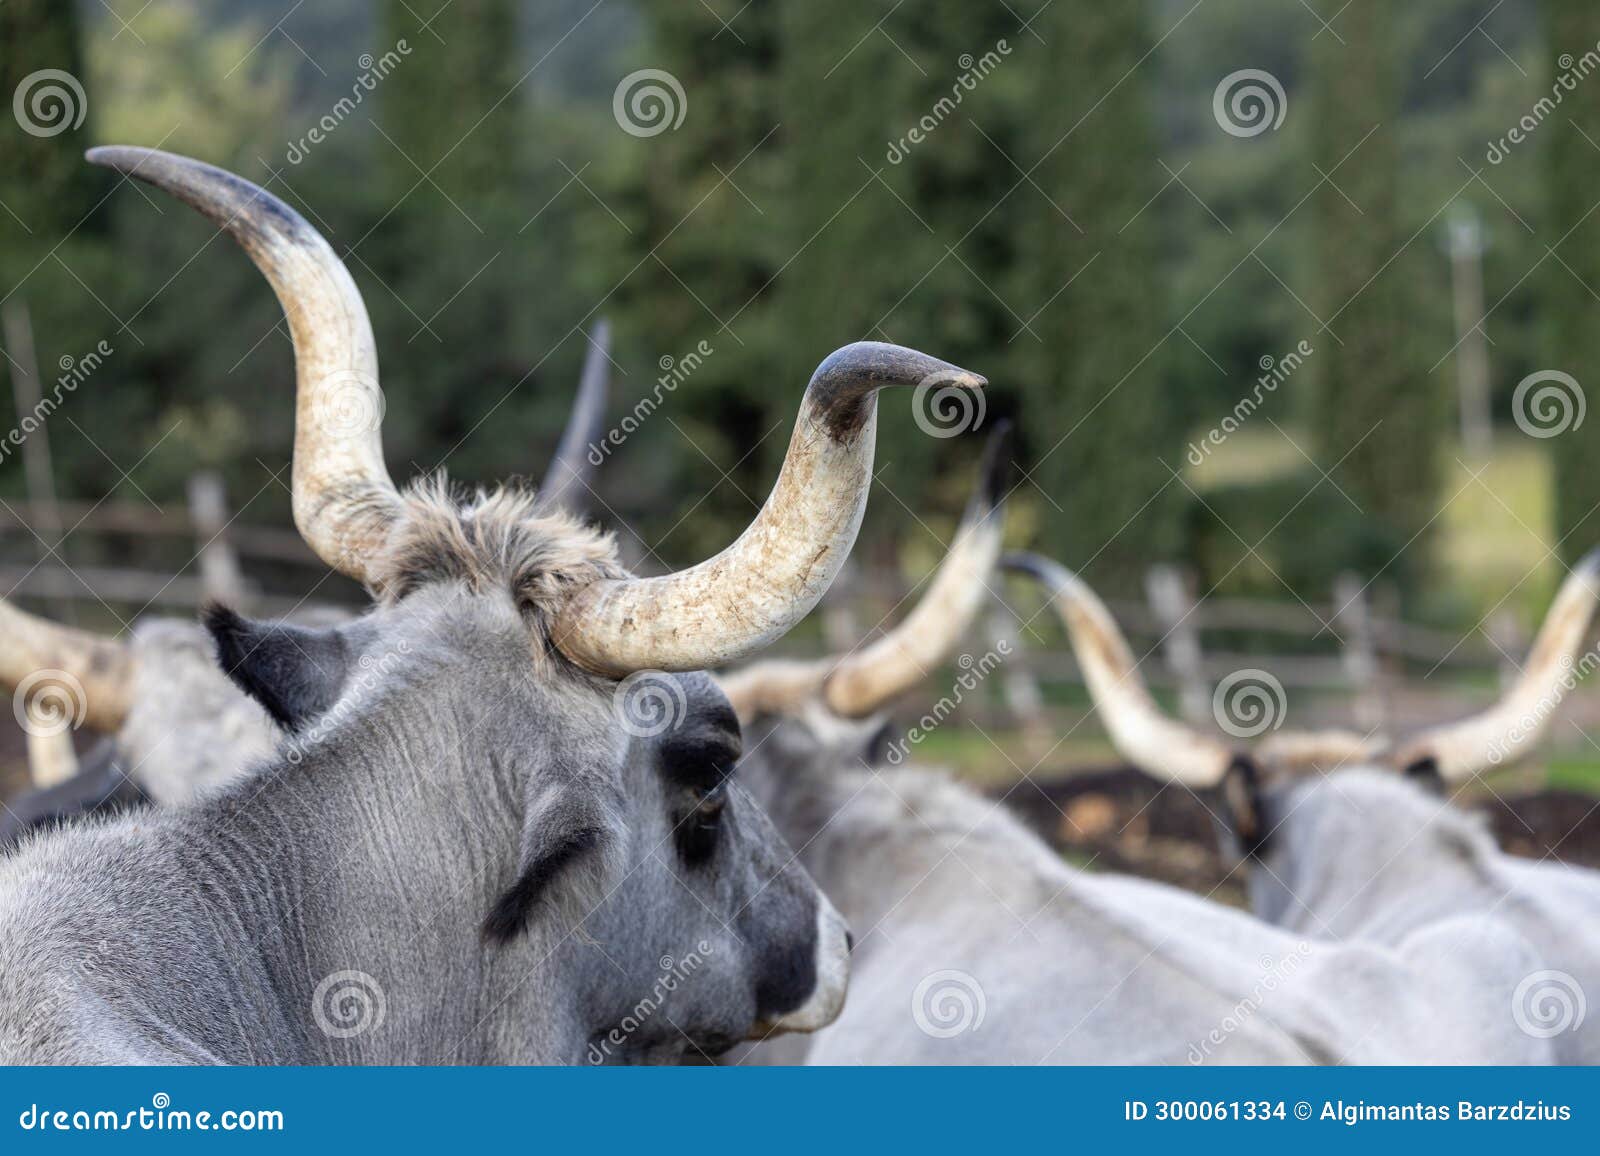 ruminant hungarian gray cattle bull in the pen from behind, big horns